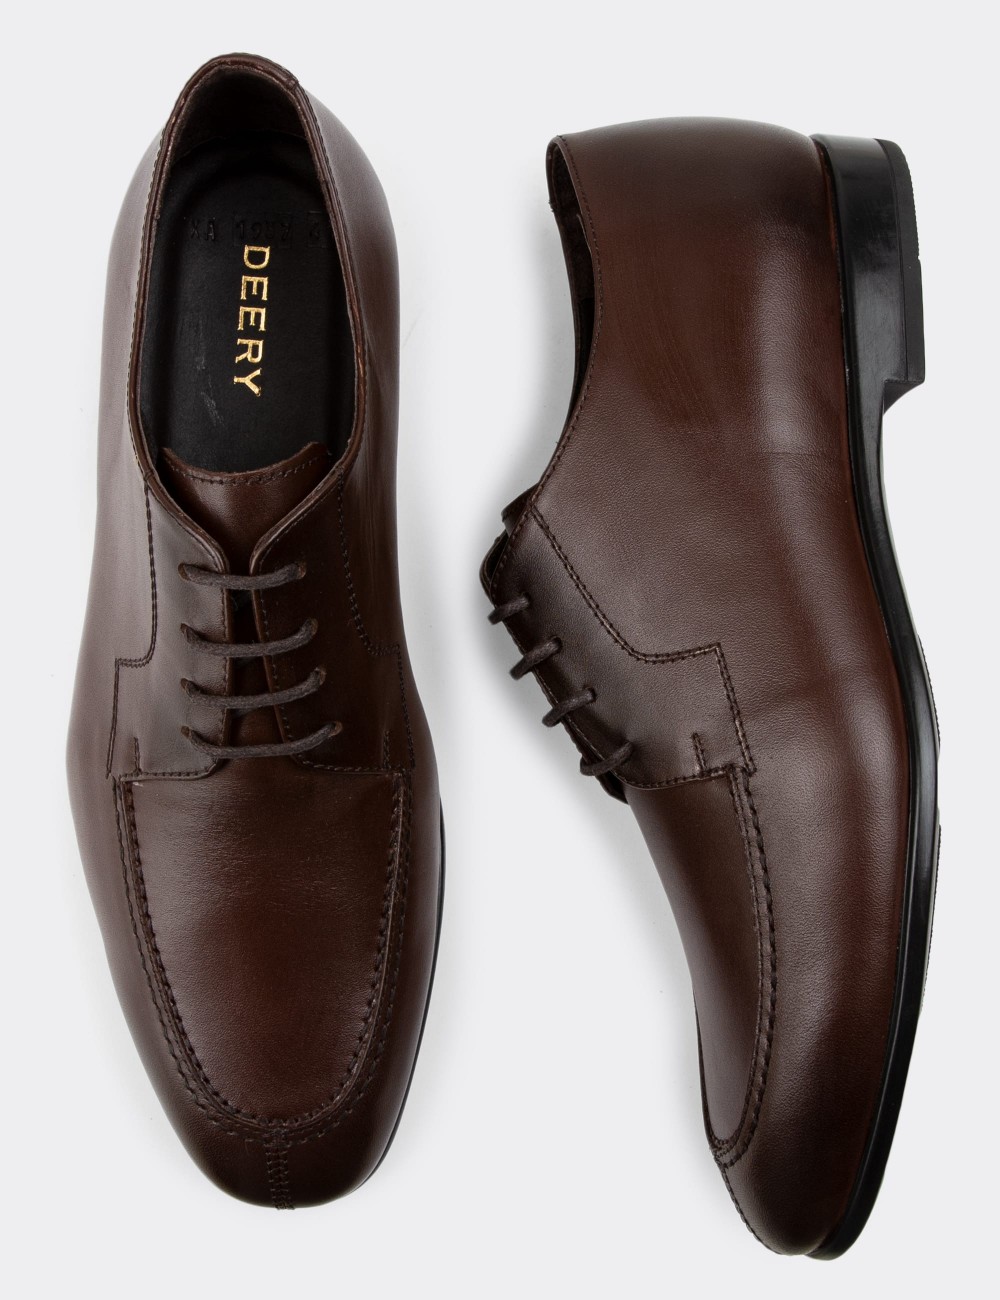 Brown Leather Classic Shoes - 01937MKHVC01